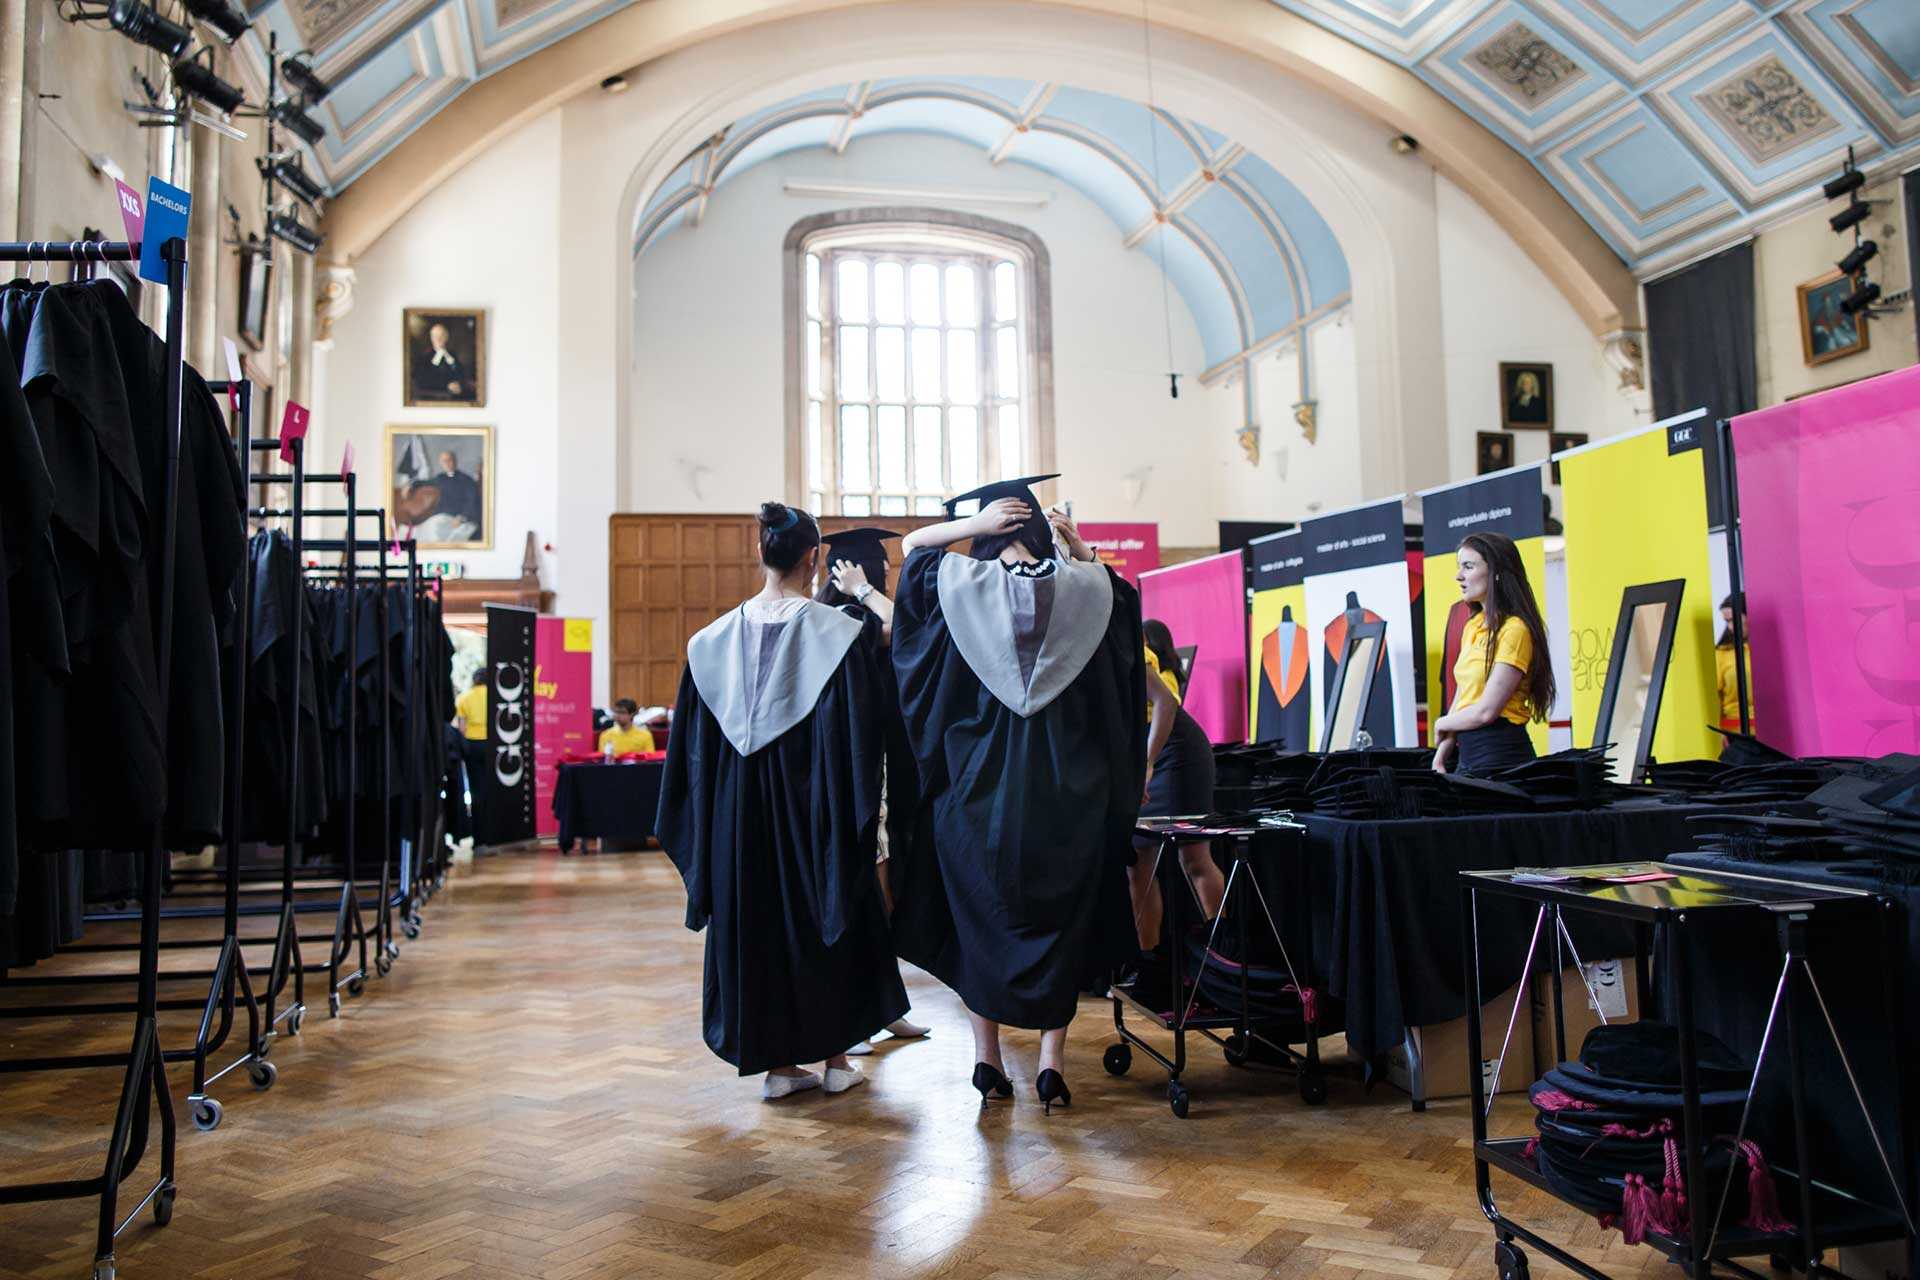 Gowns and academic dress - Staffordshire University